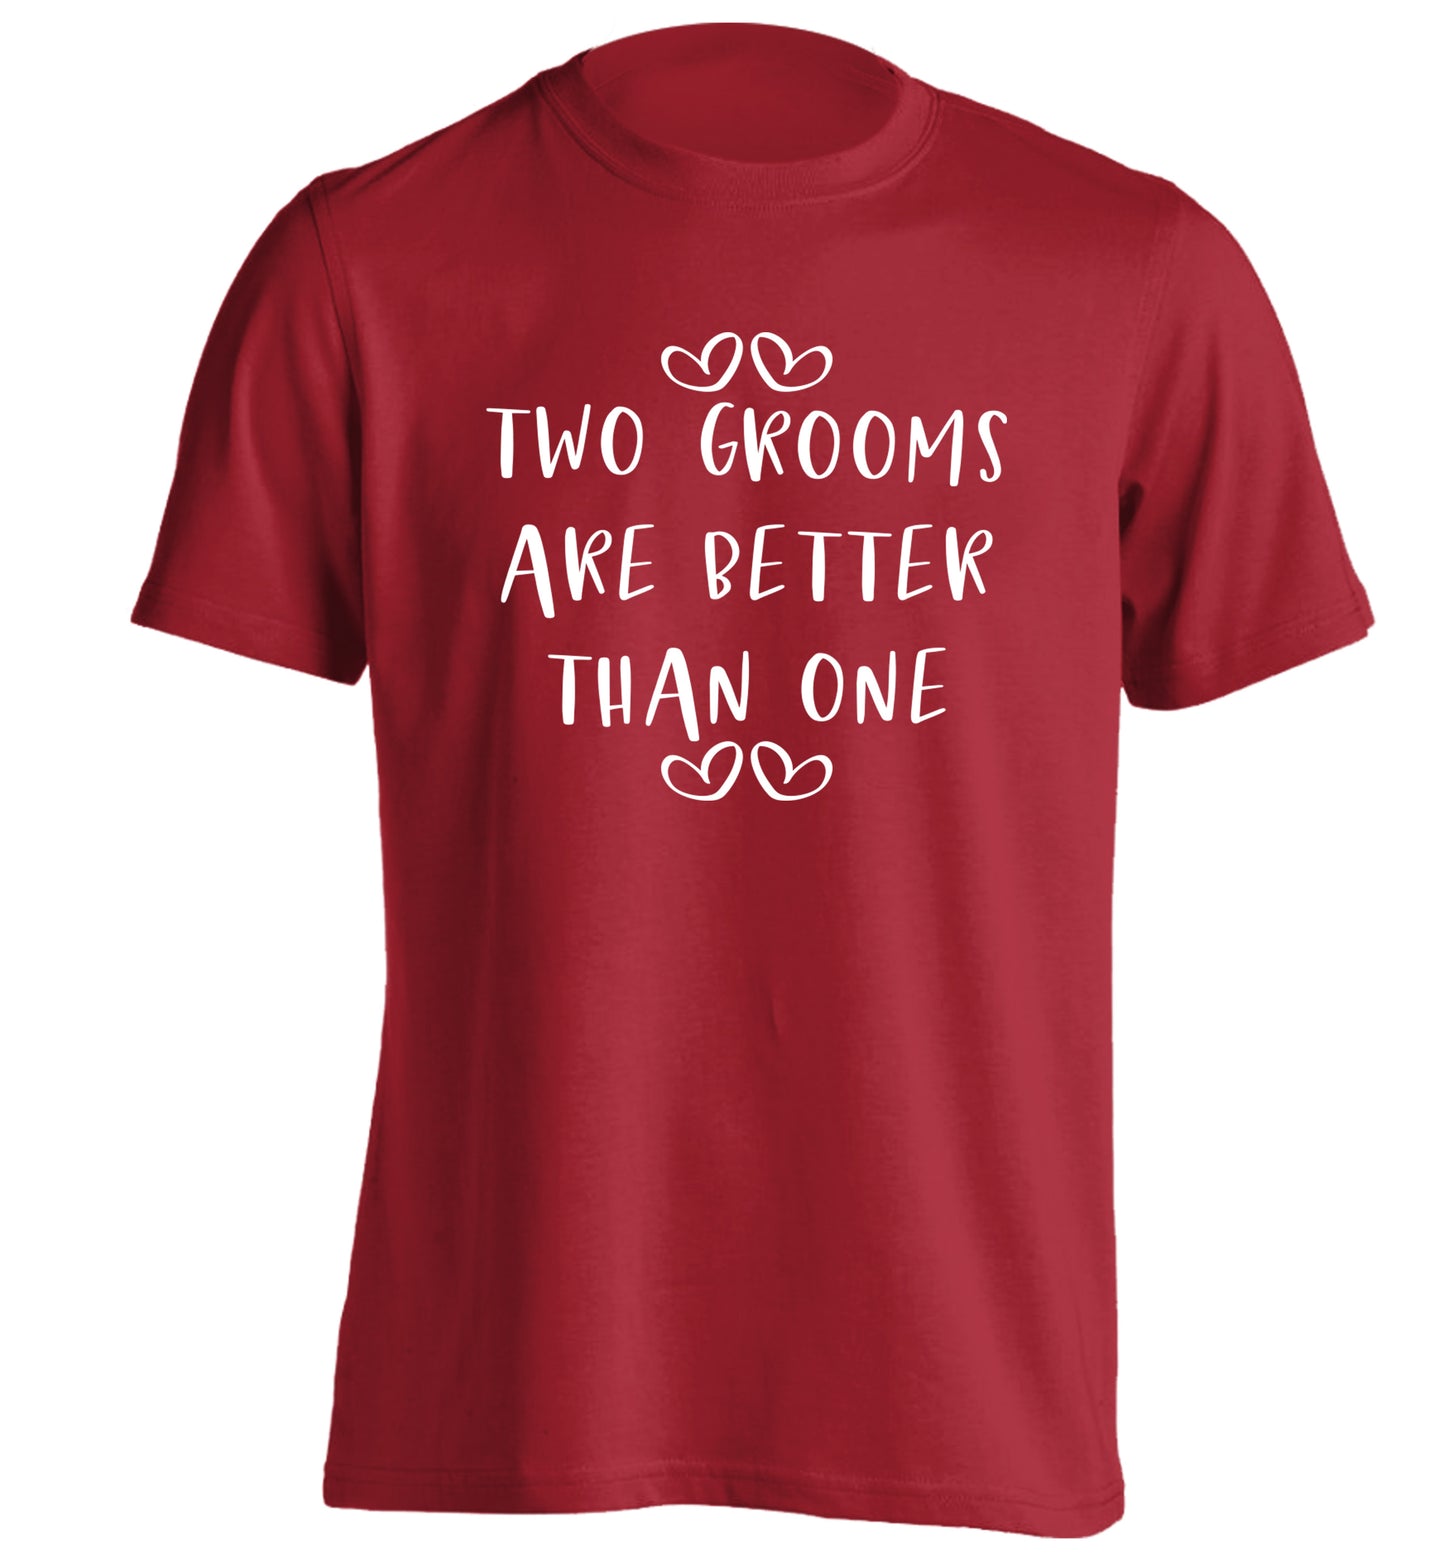 Two grooms are better than one adults unisex red Tshirt 2XL